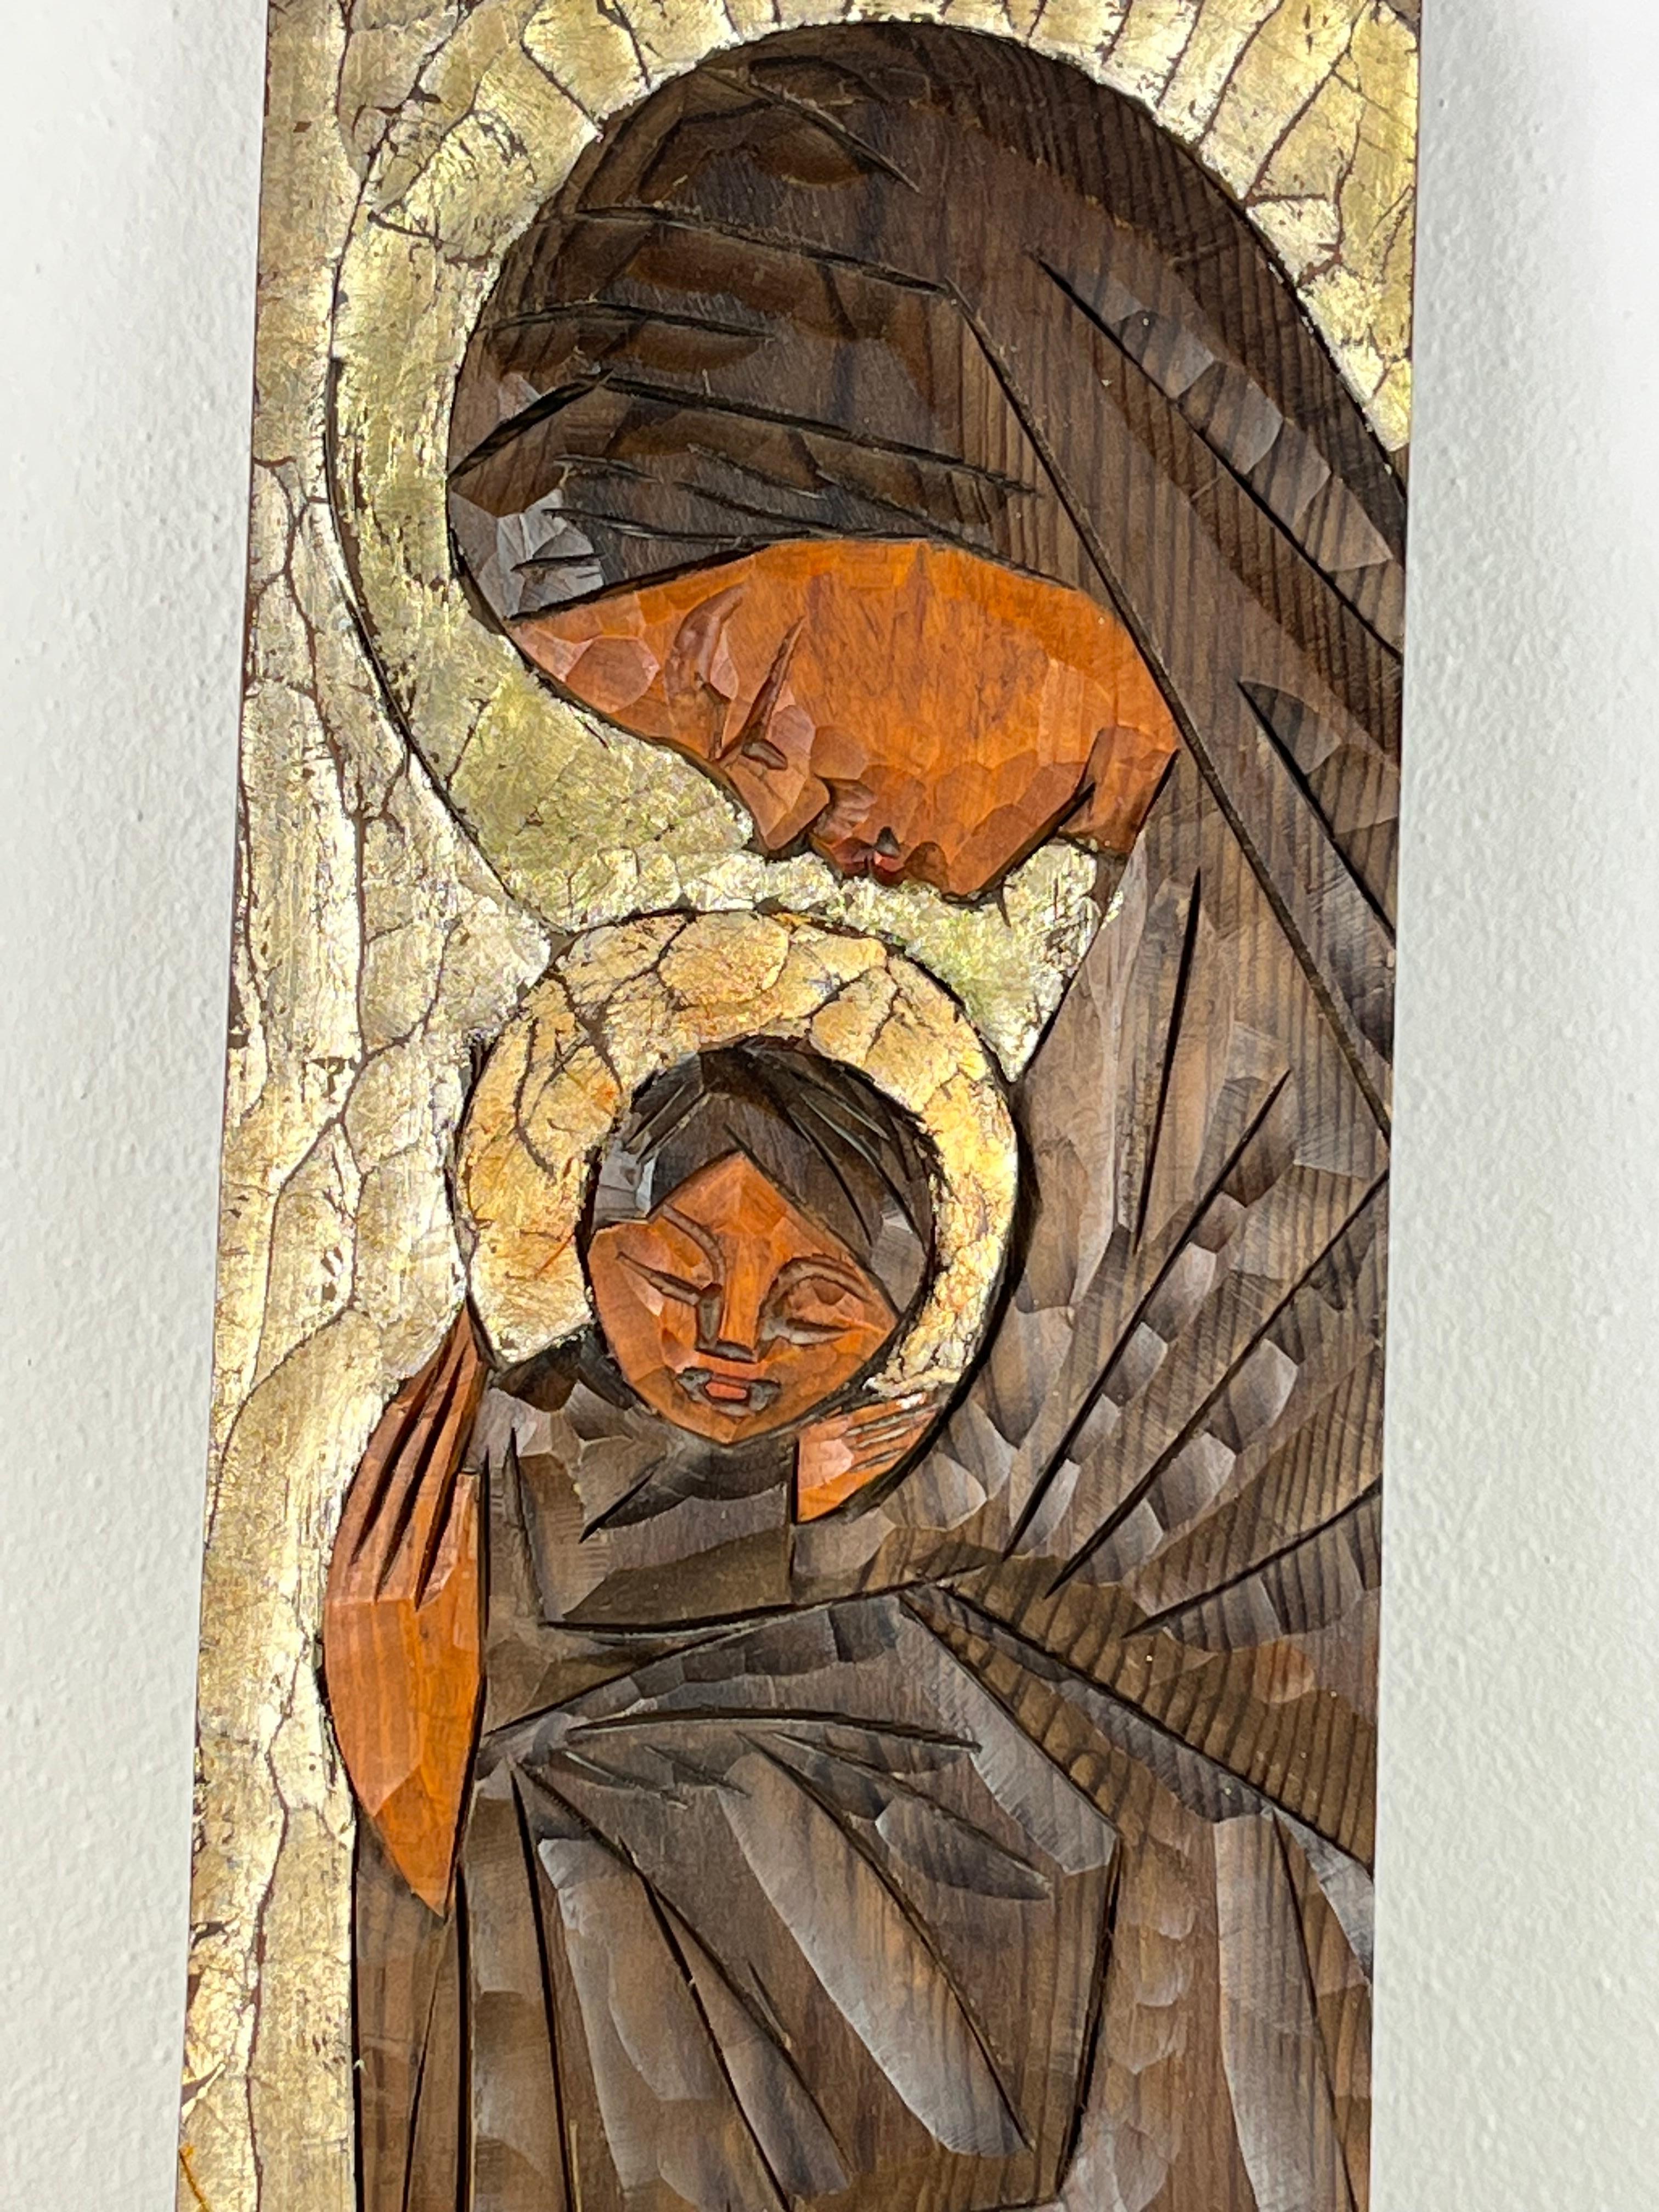 Portrait of the Madonna in wood.
Craftsmanship, dates back to the 1980s.
Painted on walnut wood panel.